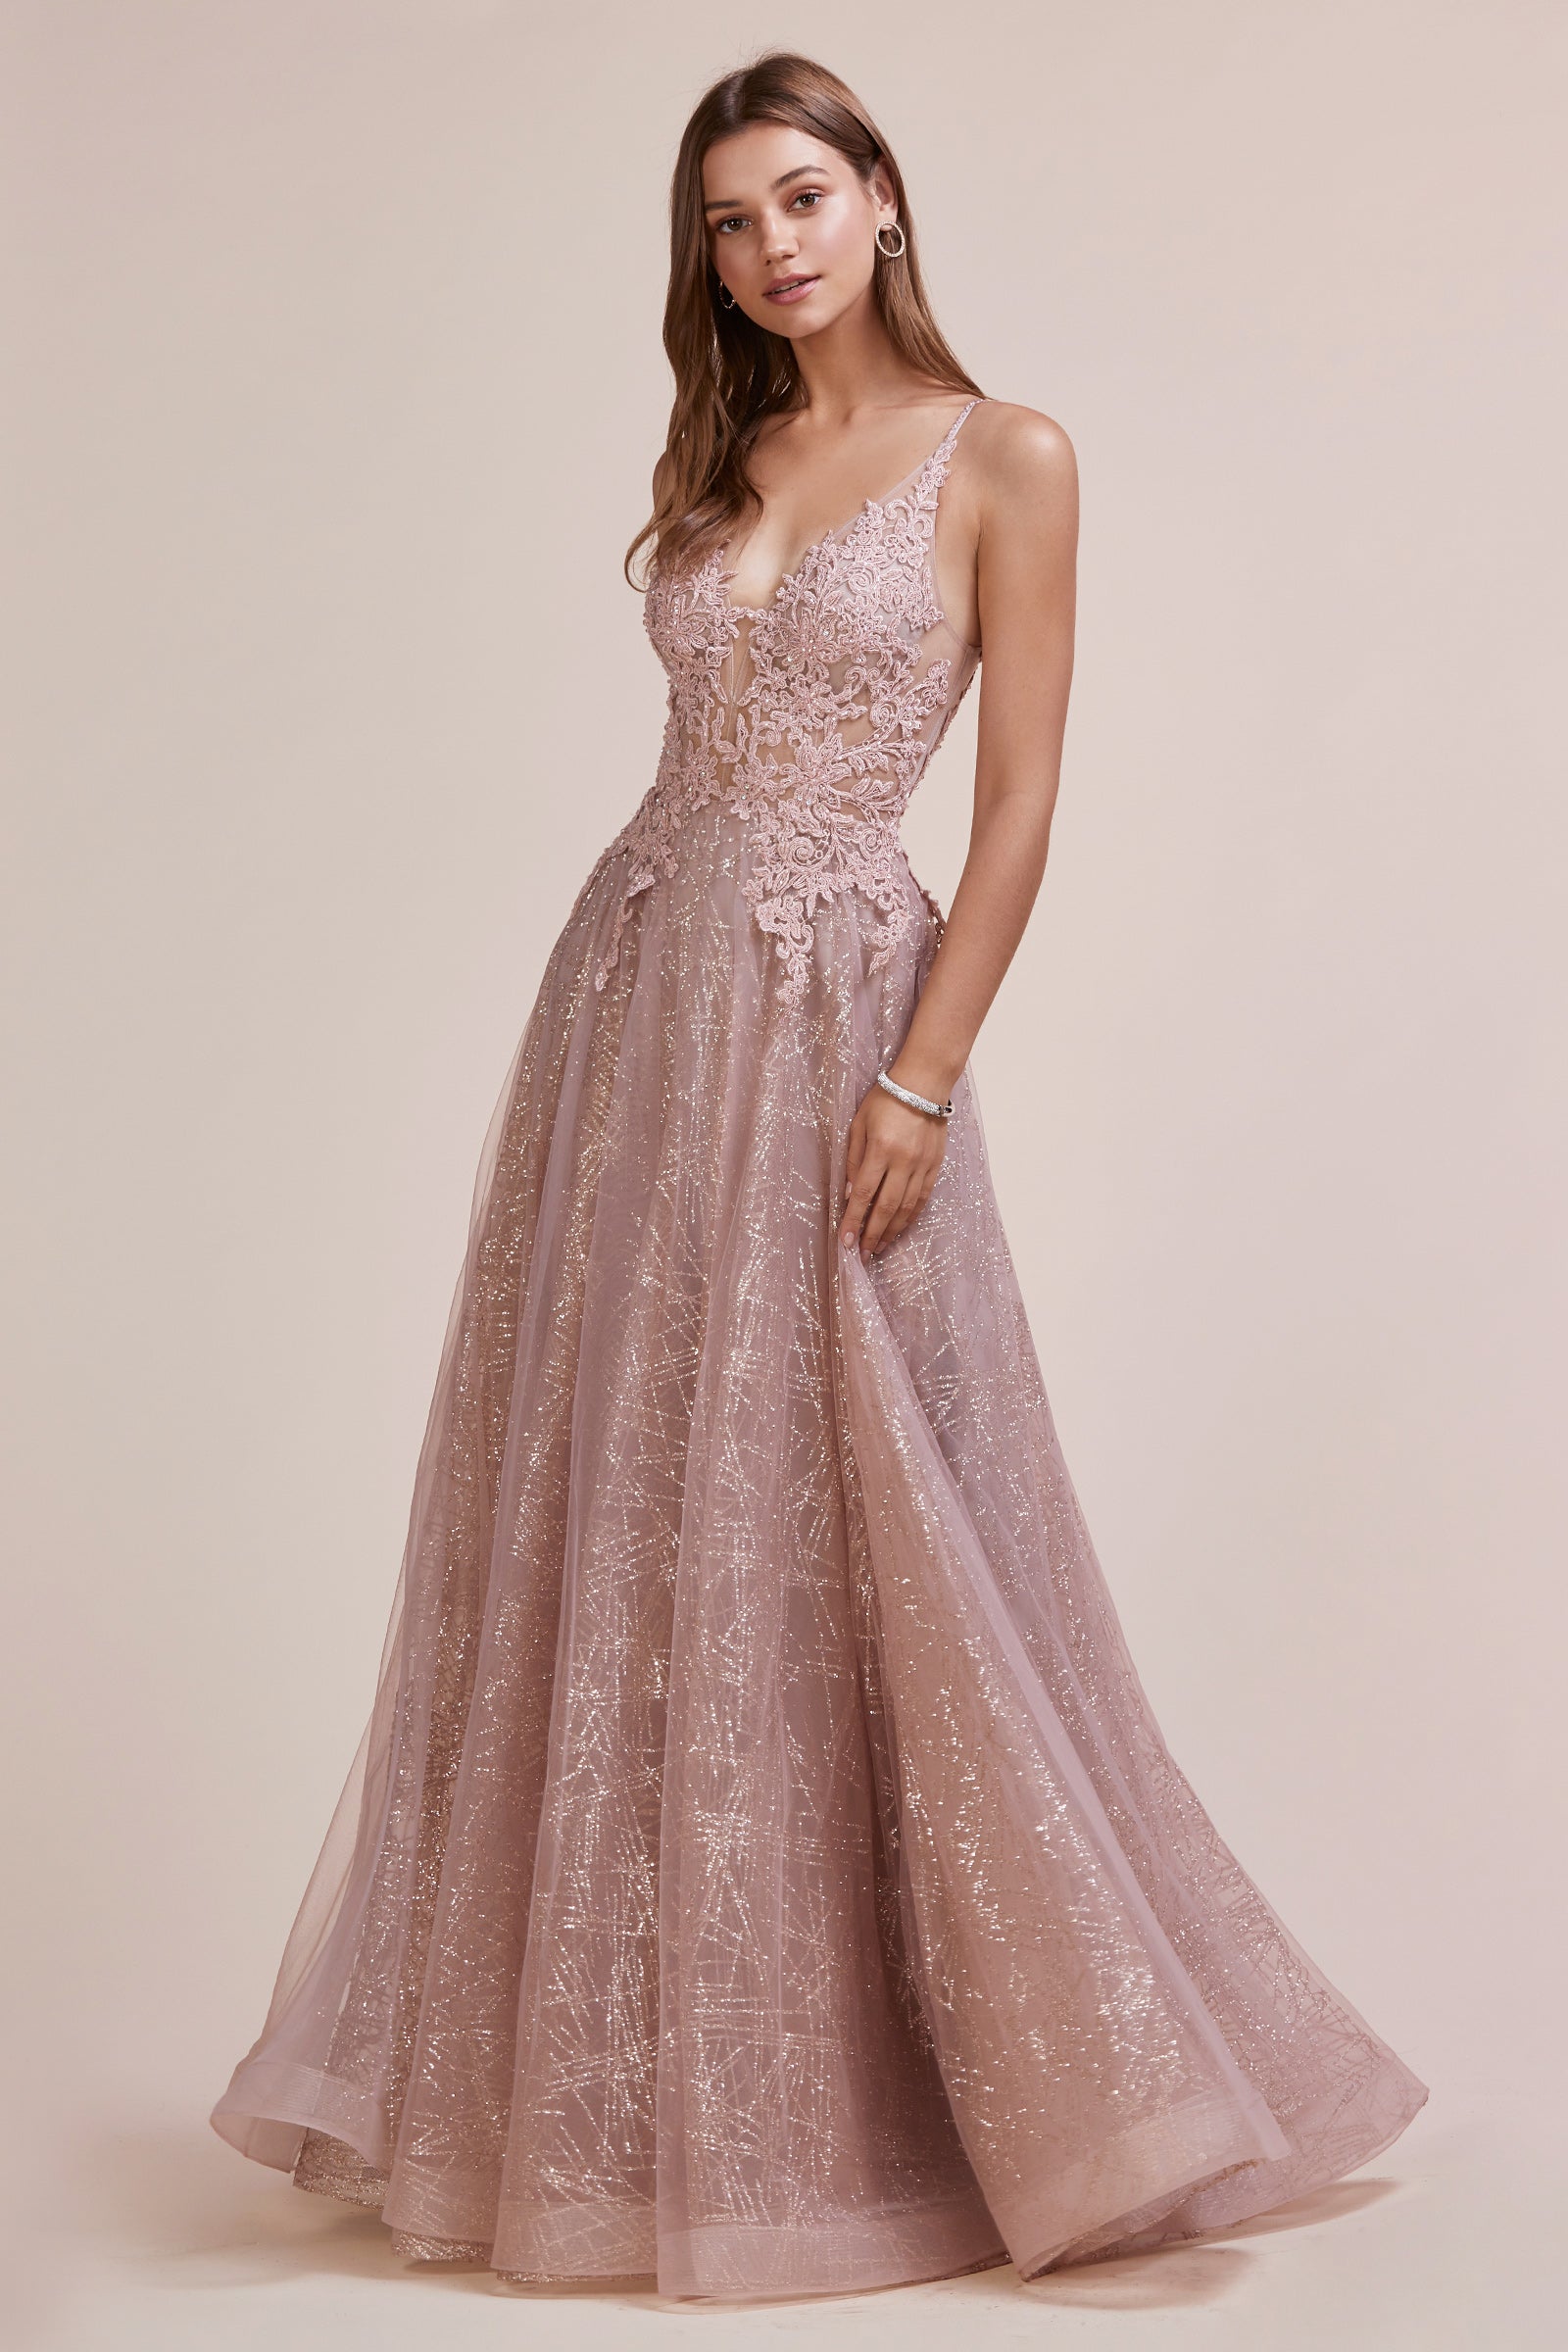 fancy dresses for wedding party